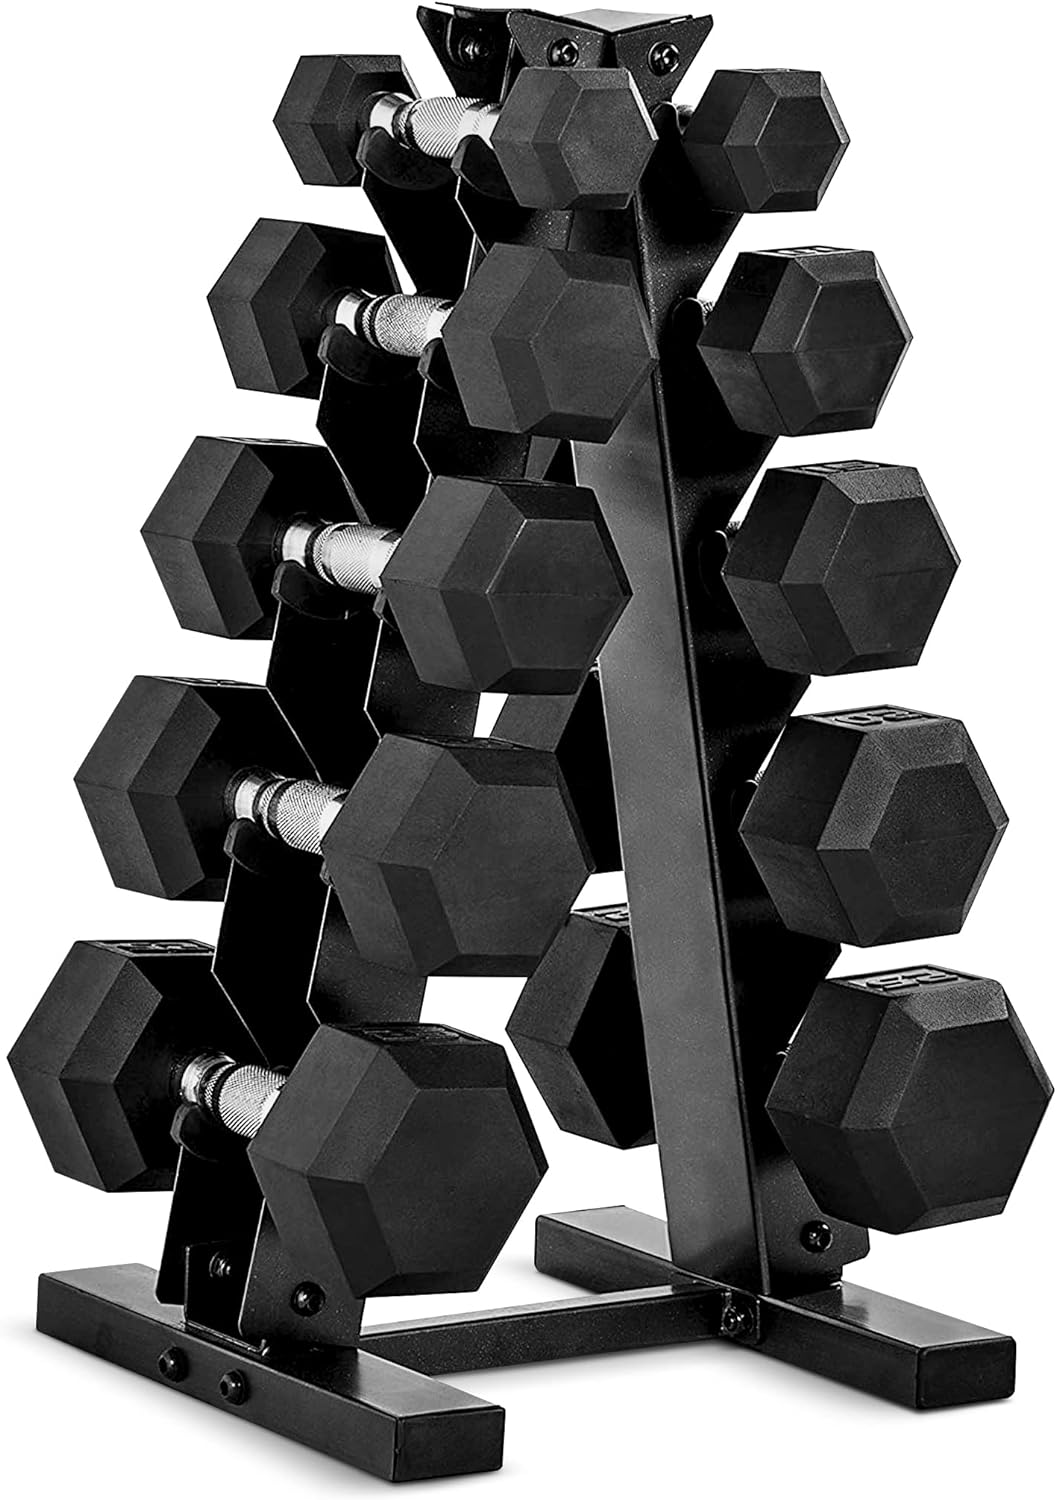 Gamma Fitness Dumbbell Set with Rack